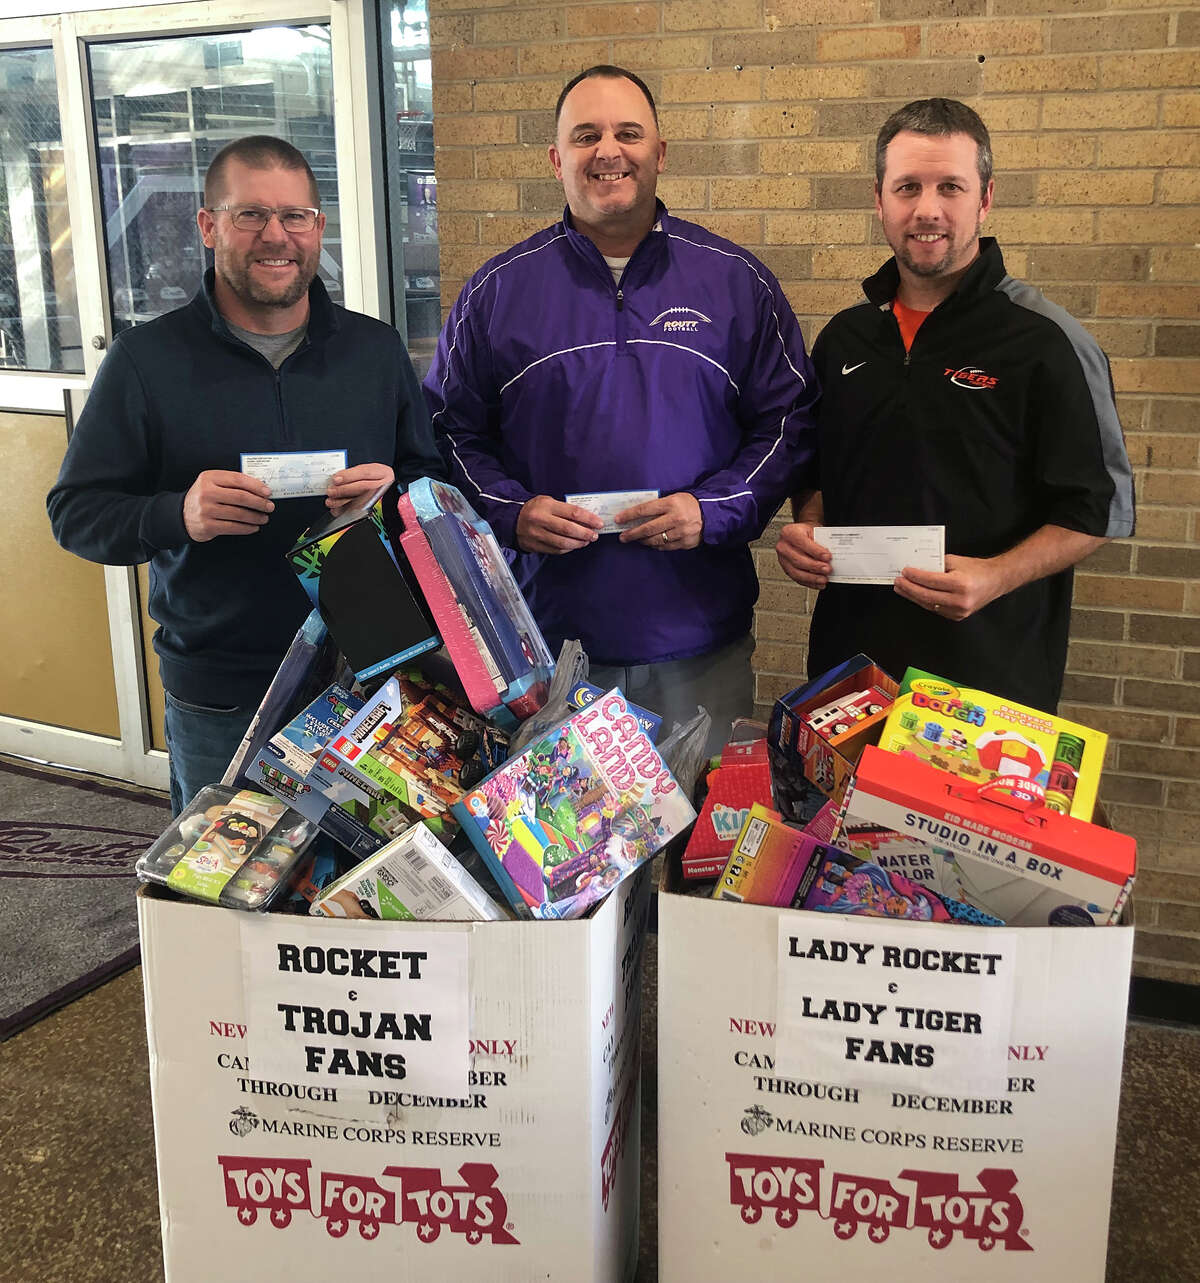 Rich Thompson (from left), athletic director at Triopia High School; Barry Creviston, athletic director at Routt Catholic High School; and Joe Pembrook, athletic director at Greenfield High School donated $5 for every 3-pointer made during their Dec. 6 and 7 games to Toys for Tots. Many toys also were collected from those attending the game to be donated to Toys for Tots.